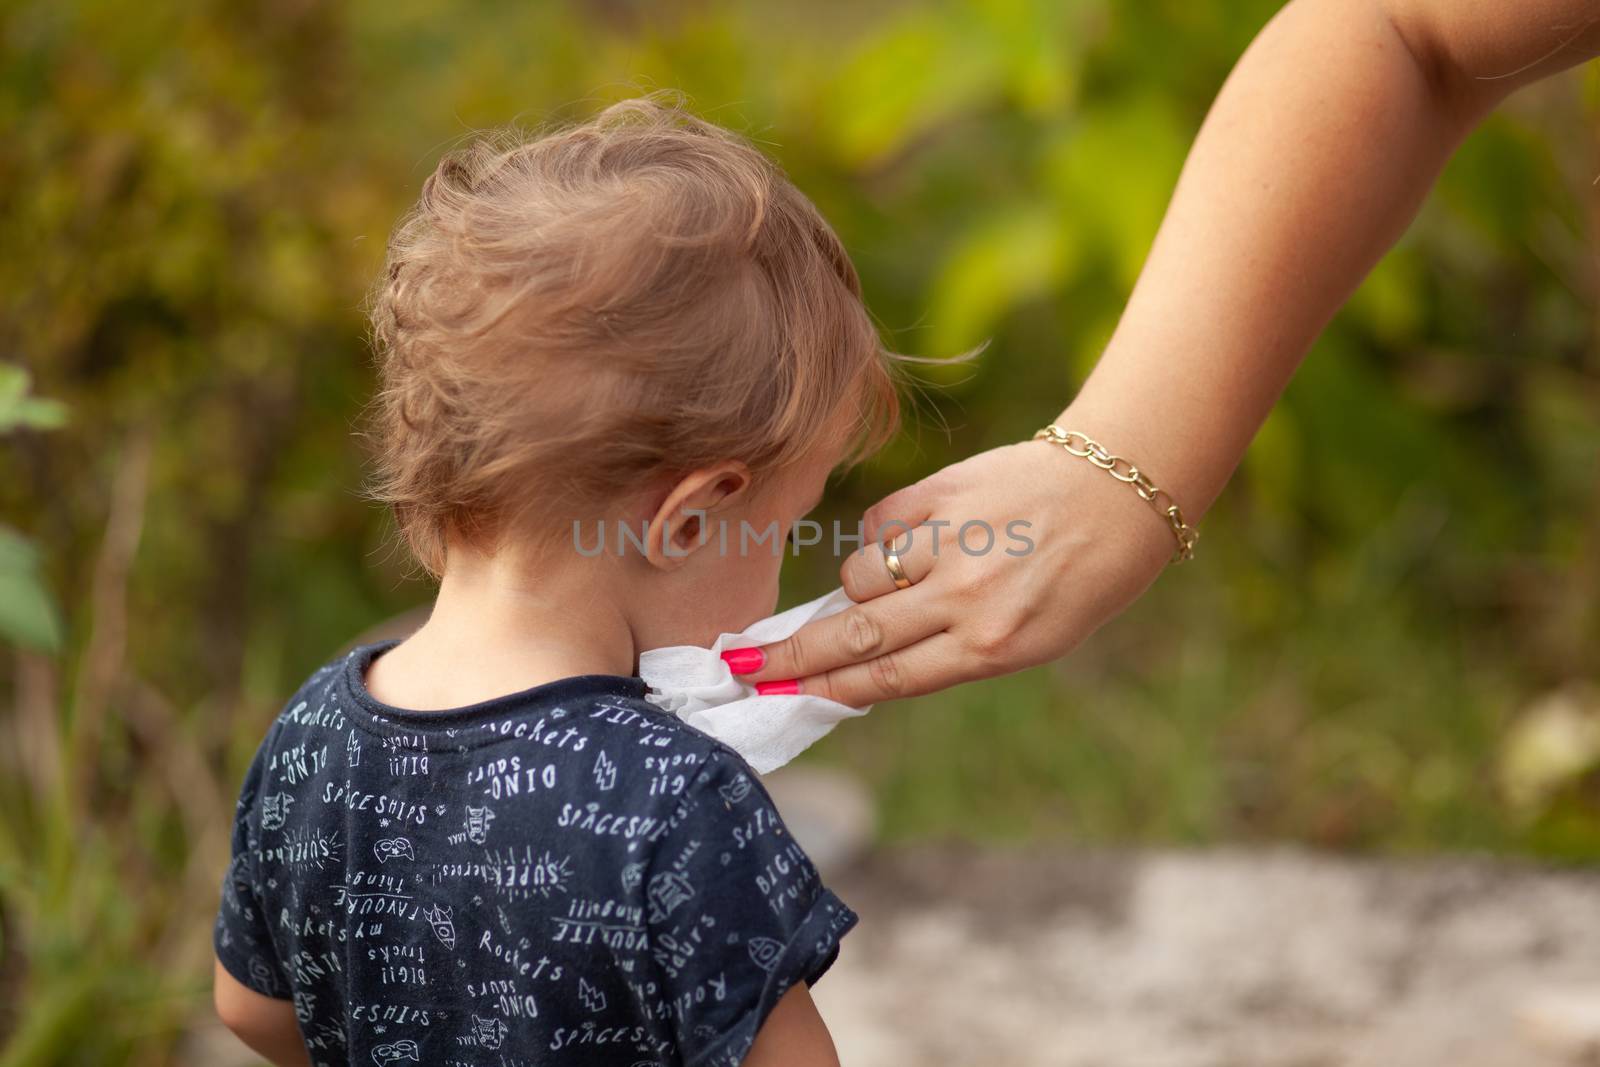 Hygiene - mom wiping the baby face skin with wet wipes. Cleaning wipe, pure, clean, outdoor